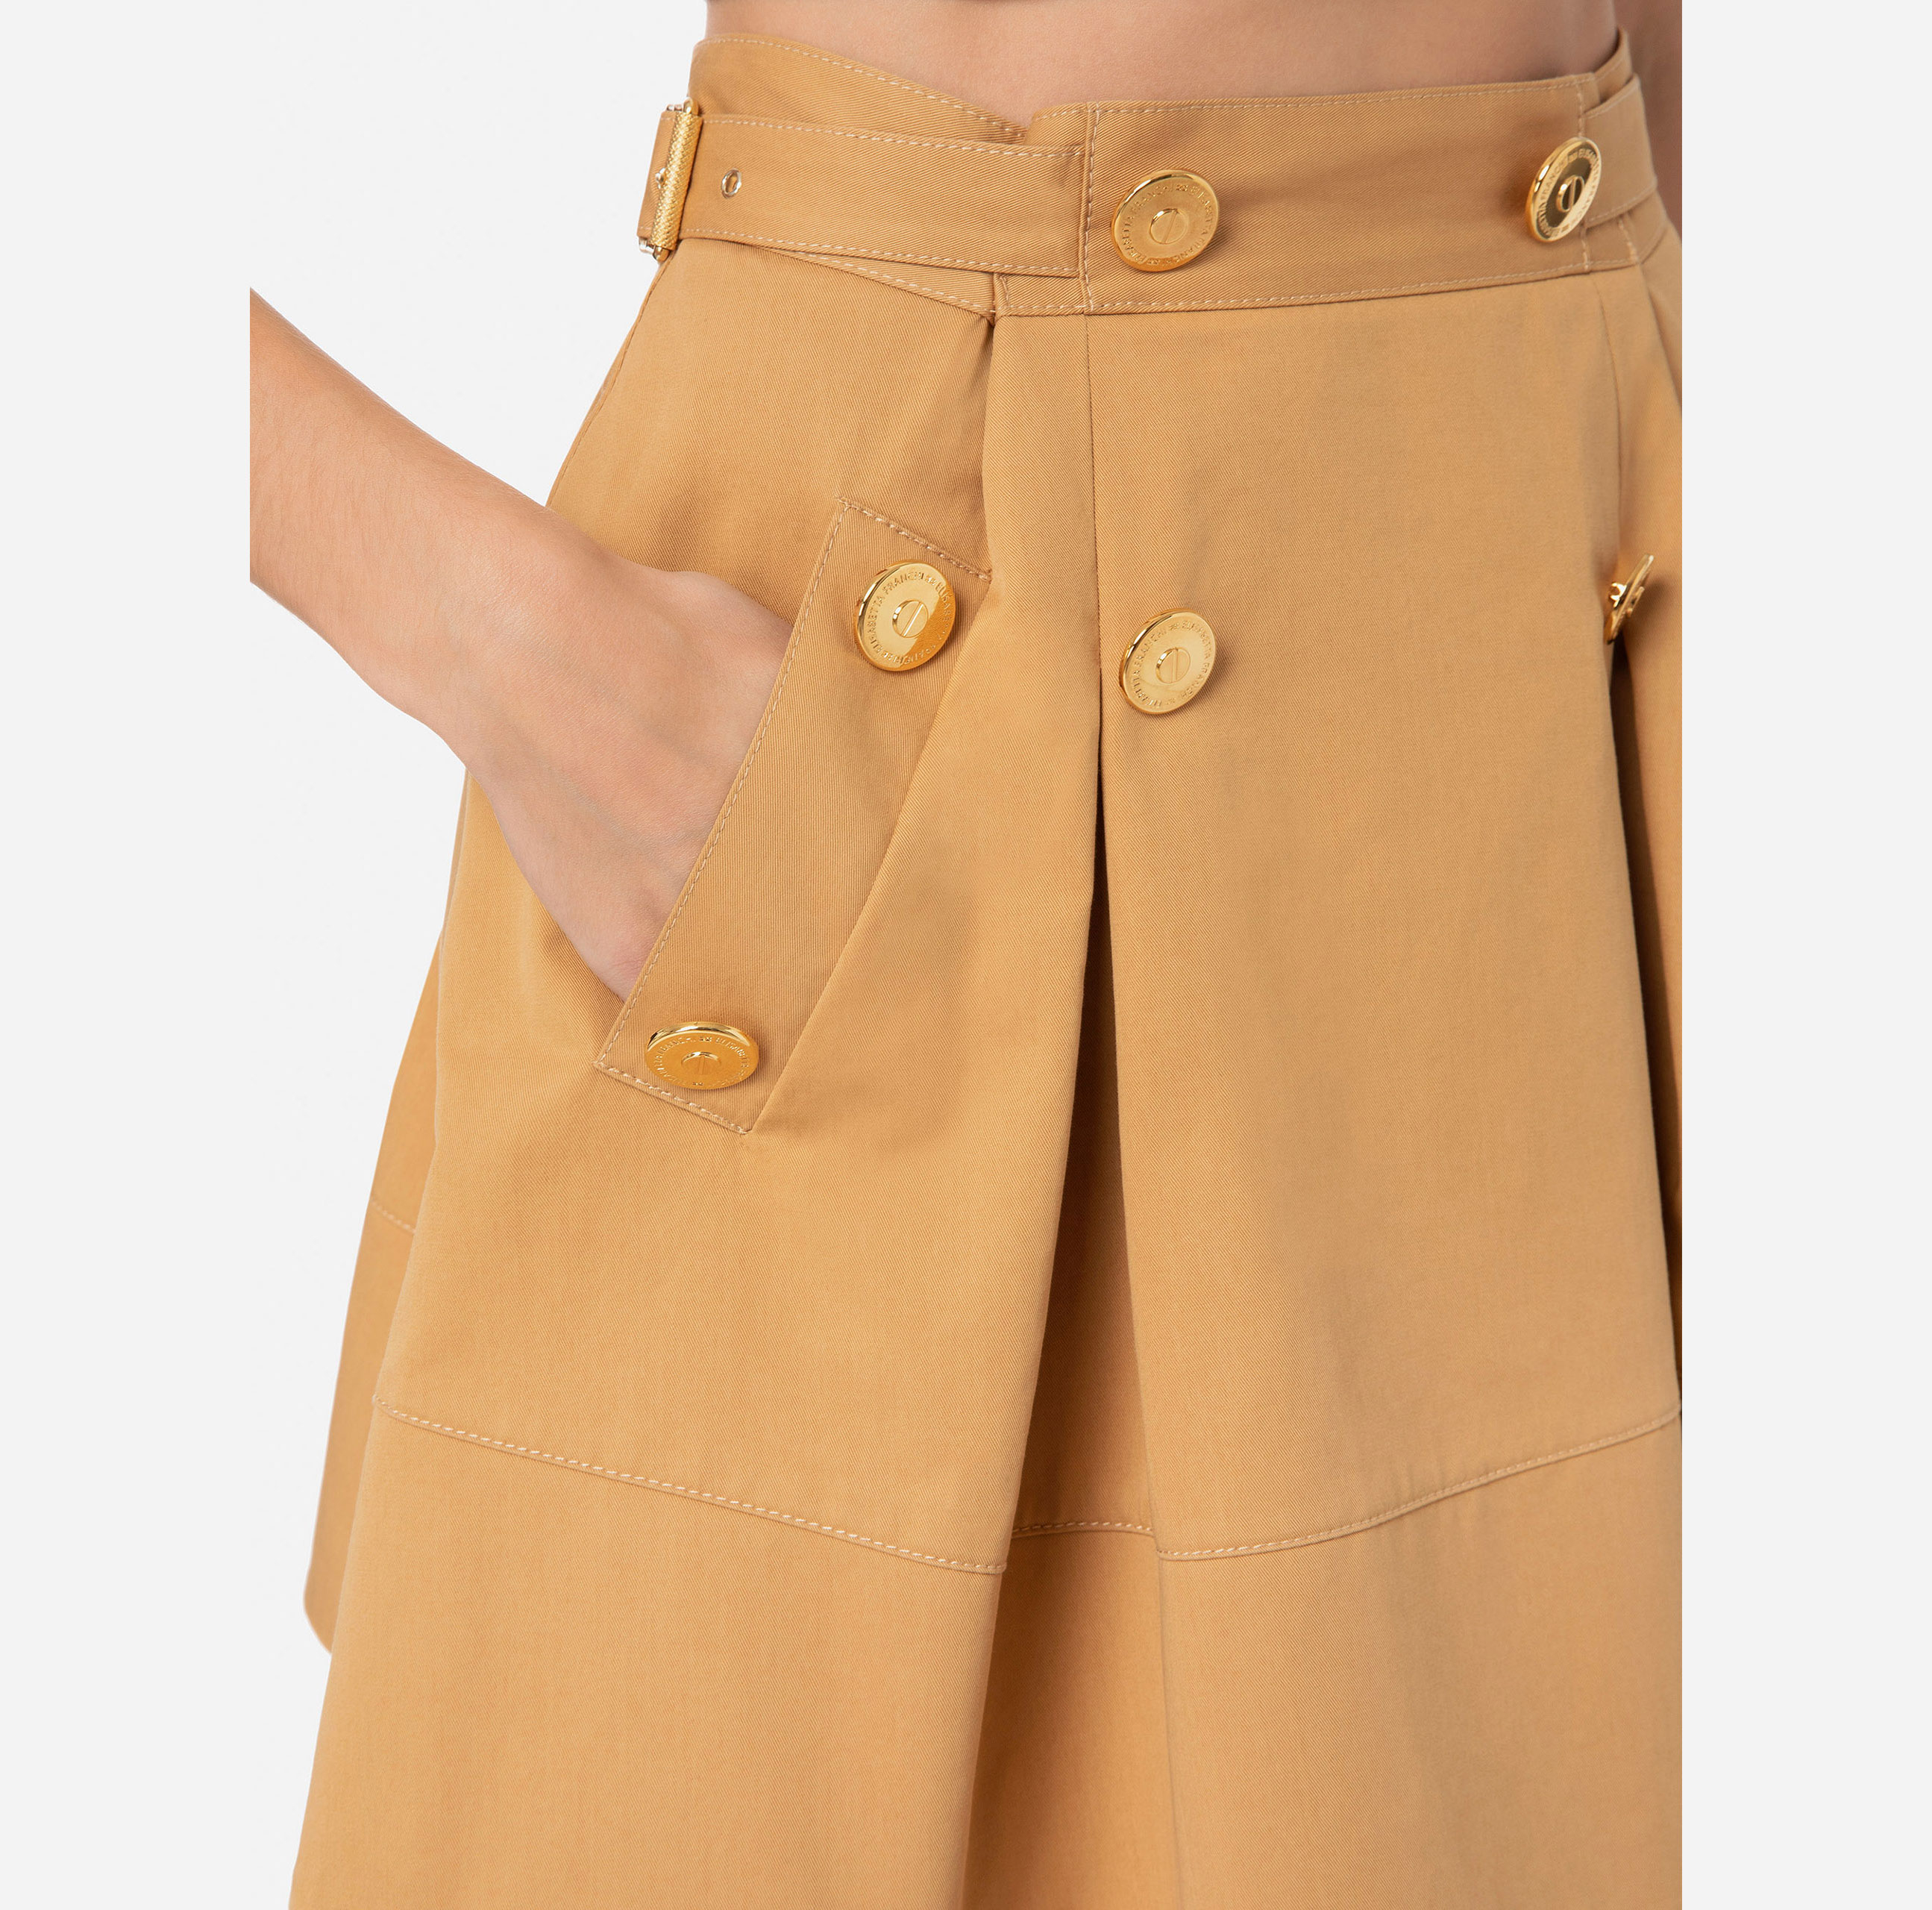 Flared miniskirt with waistband and double front pleat - Elisabetta Franchi